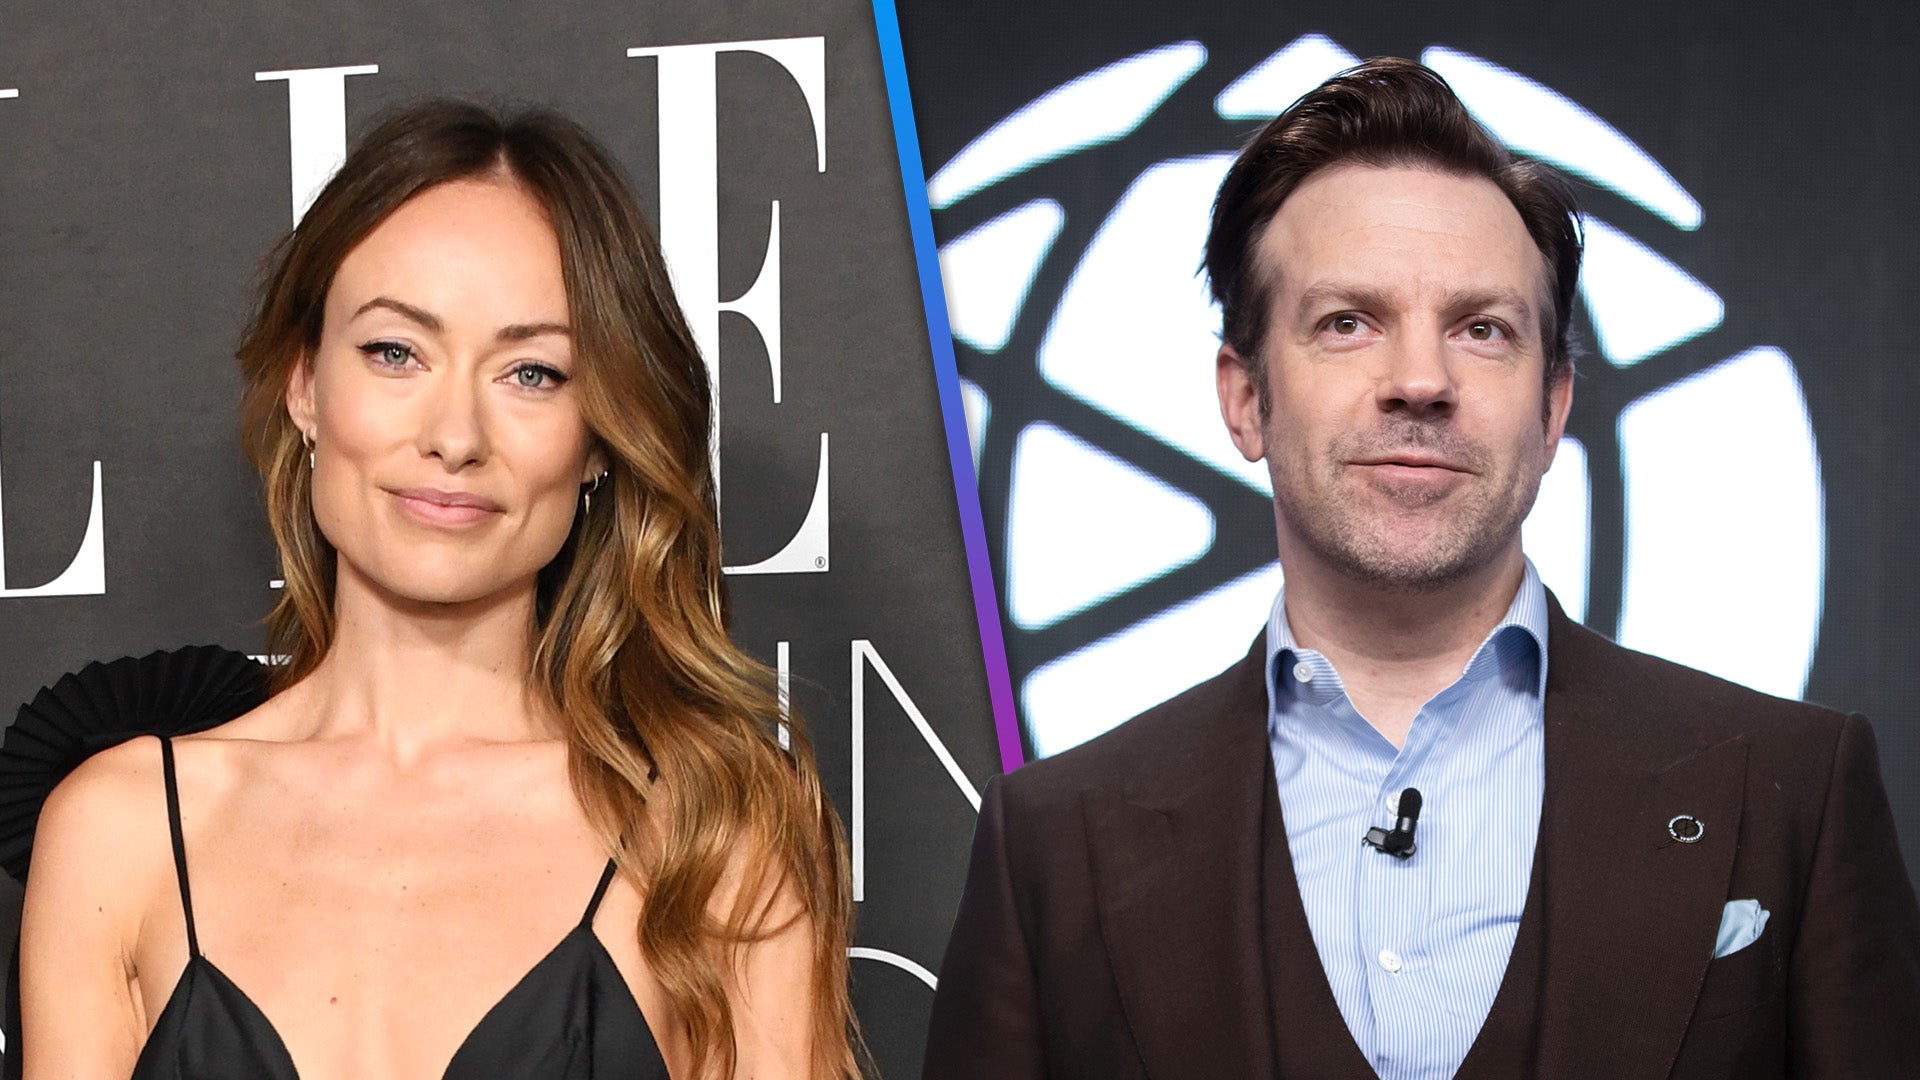 Olivia Wilde and Jason Sudeikis Respond to Allegations By Former